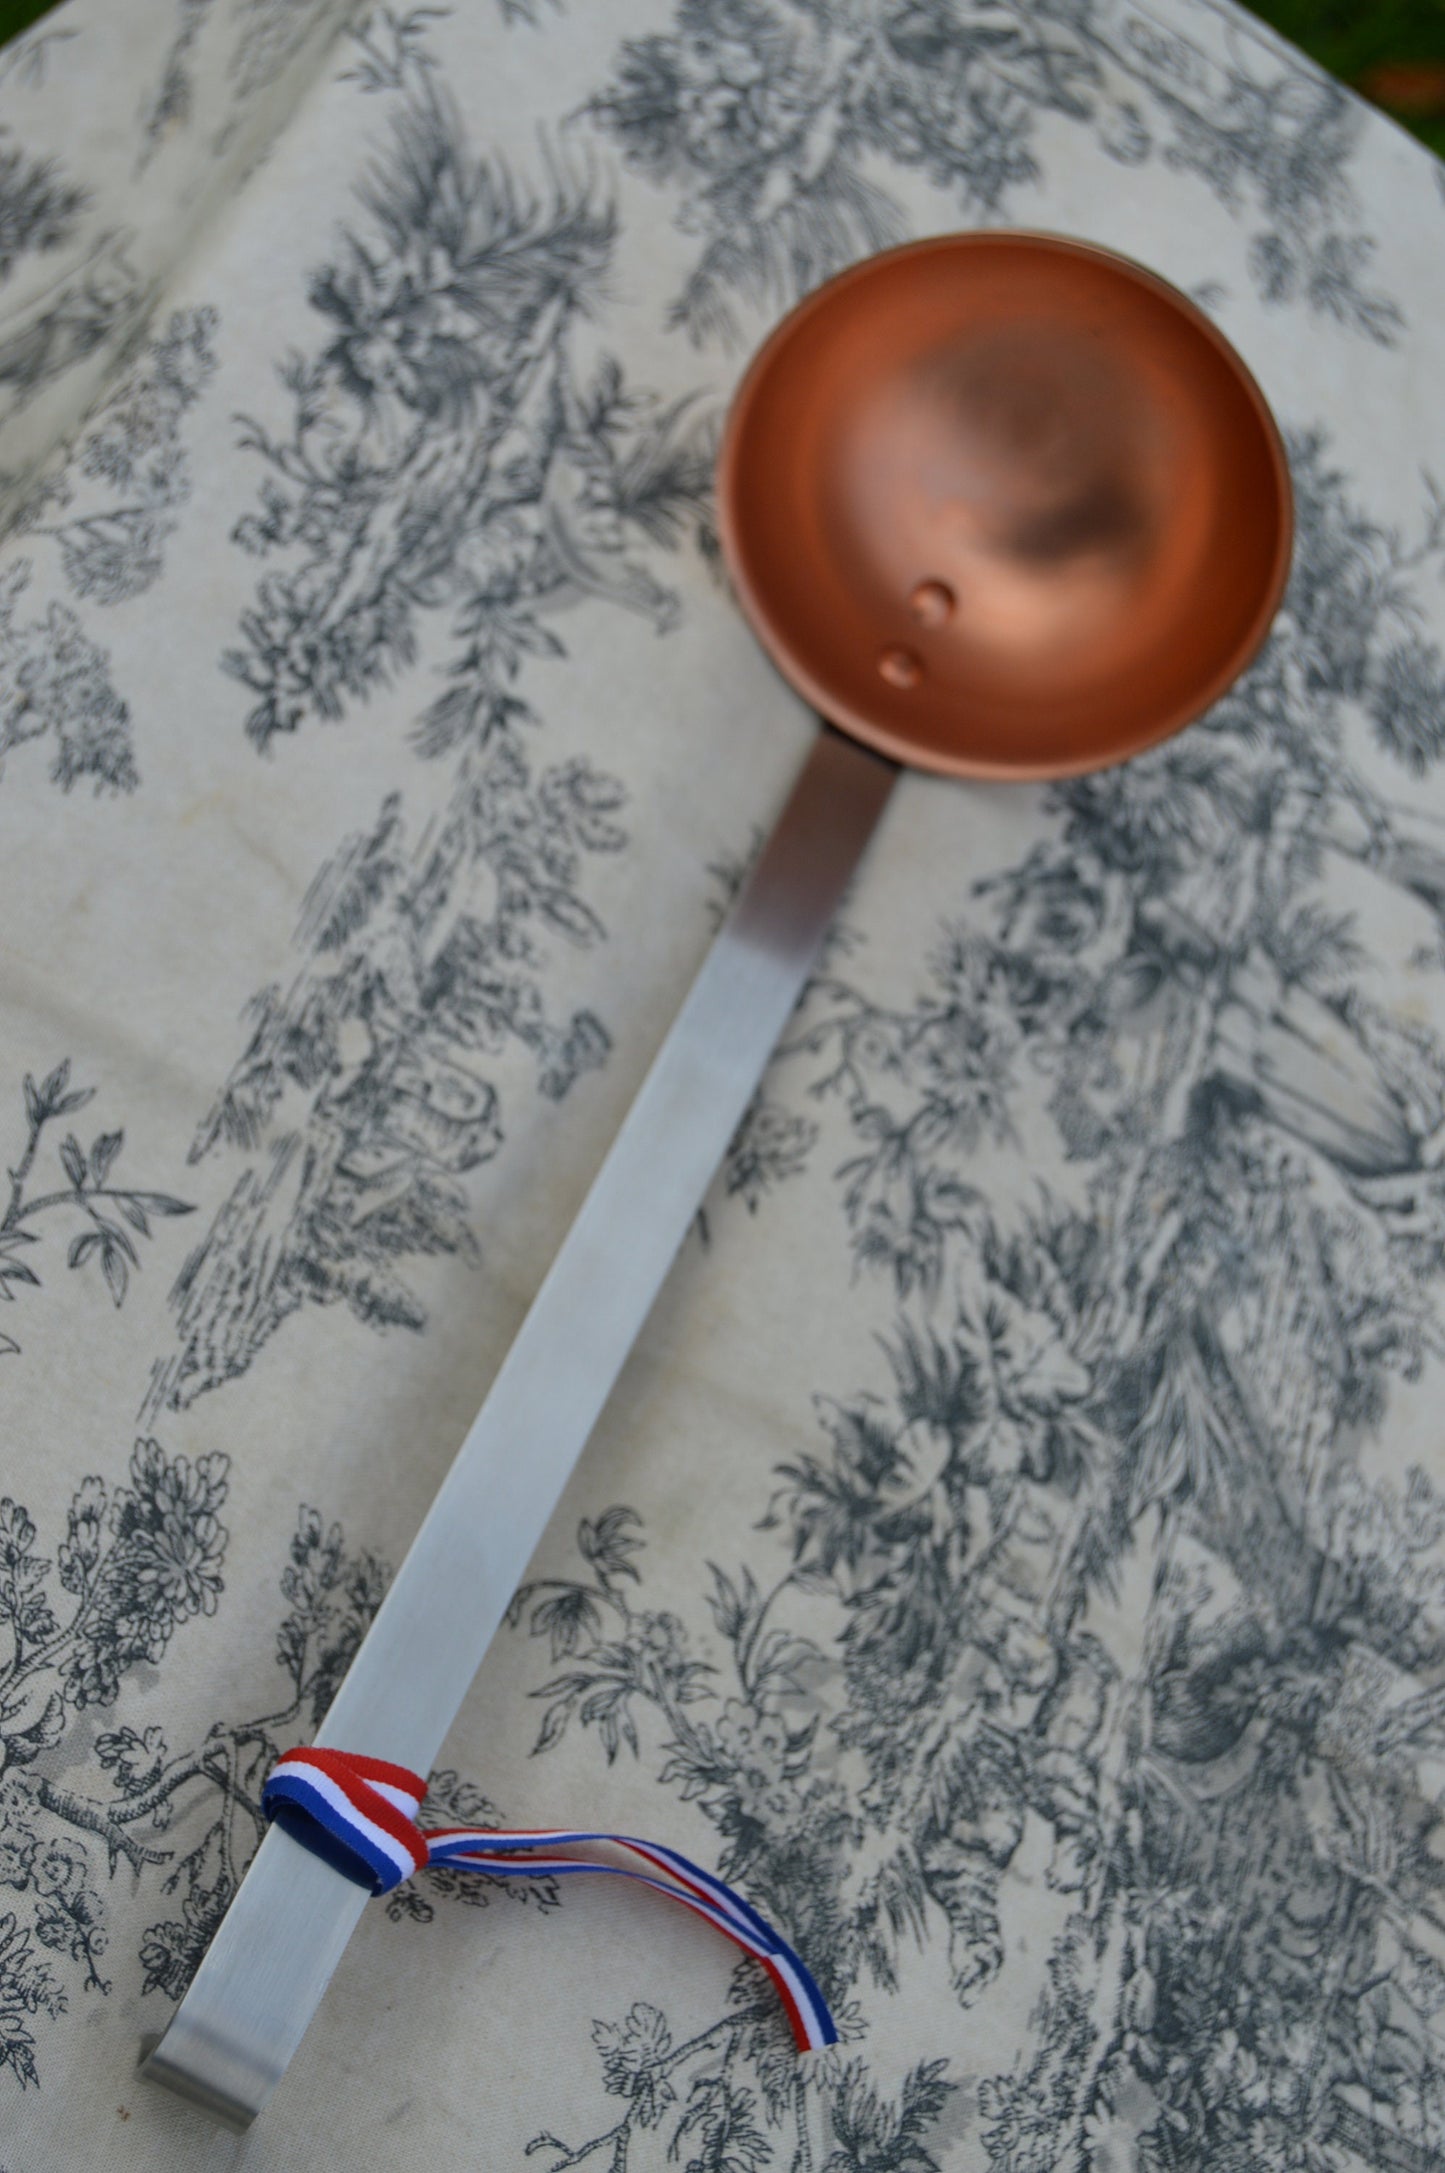 New NKC Copper Ladle from Normandy Kitchen Copper Jam Jelly Spoon Stainless Steel Handle Ladle New Normandy Kitchen Copper Collection Louche